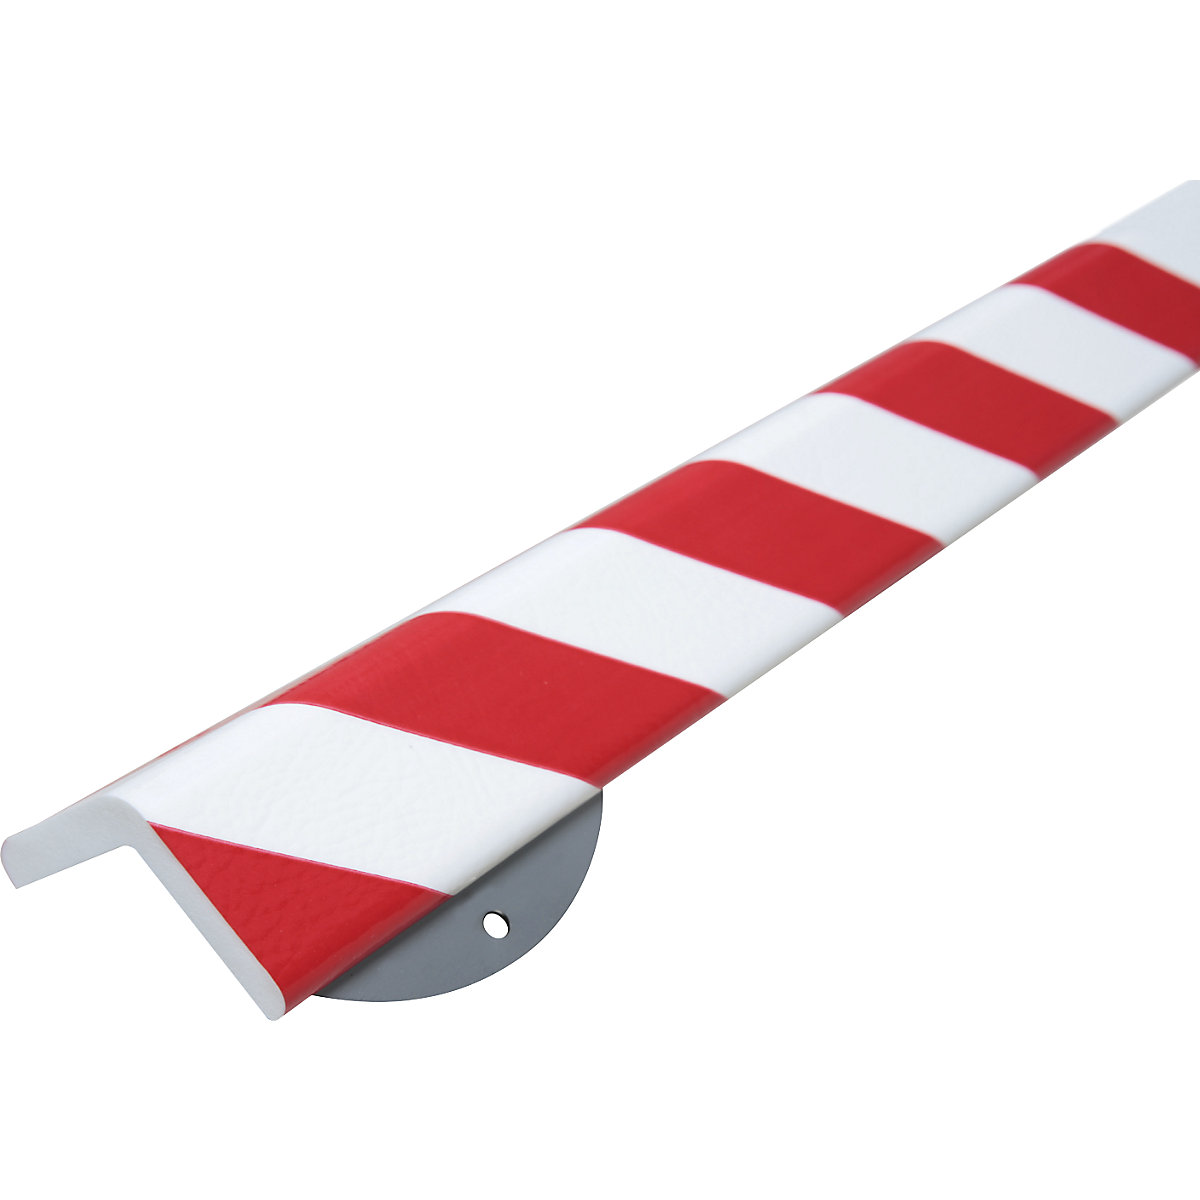 Knuffi® corner protection with mounting rail – SHG, type H+, 1 m piece, red / white-16